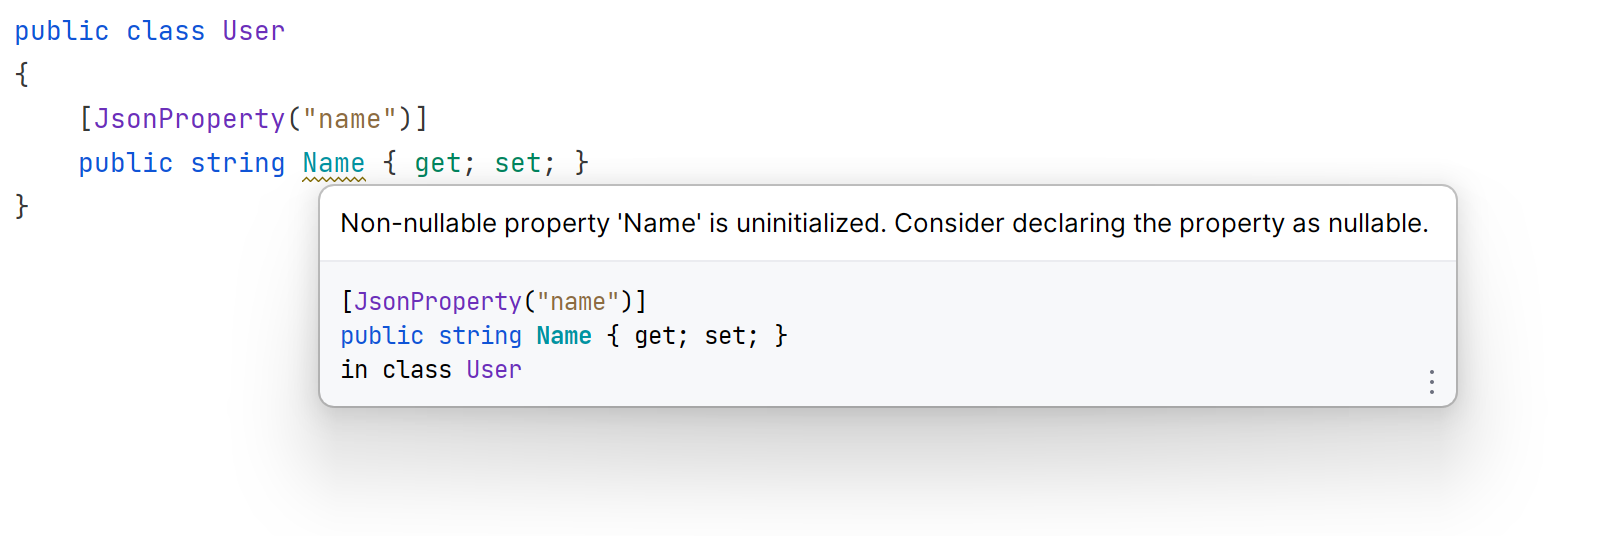 Non-nullable property is uninitialized. Consider declaring the property as nullable.